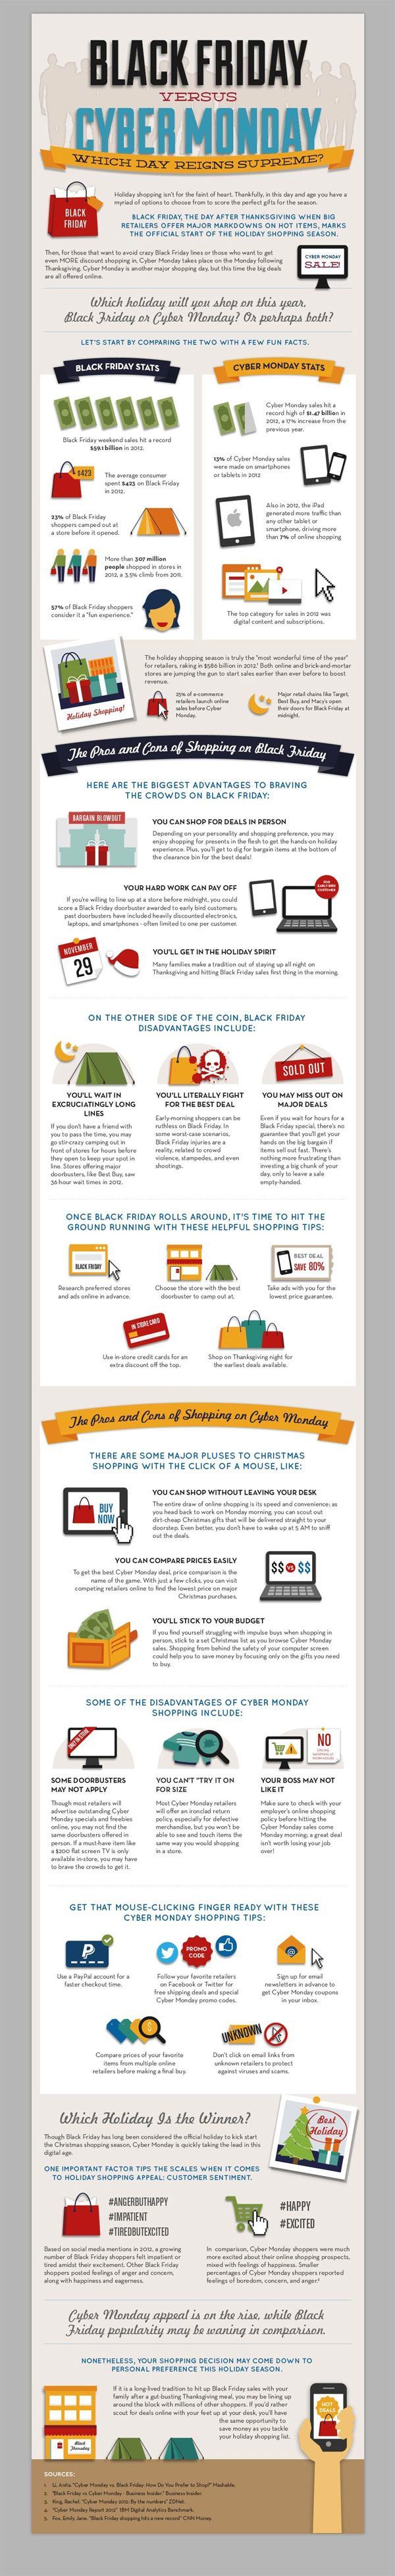 20 Black Friday And Cyber Monday Infographics image 15.jpg